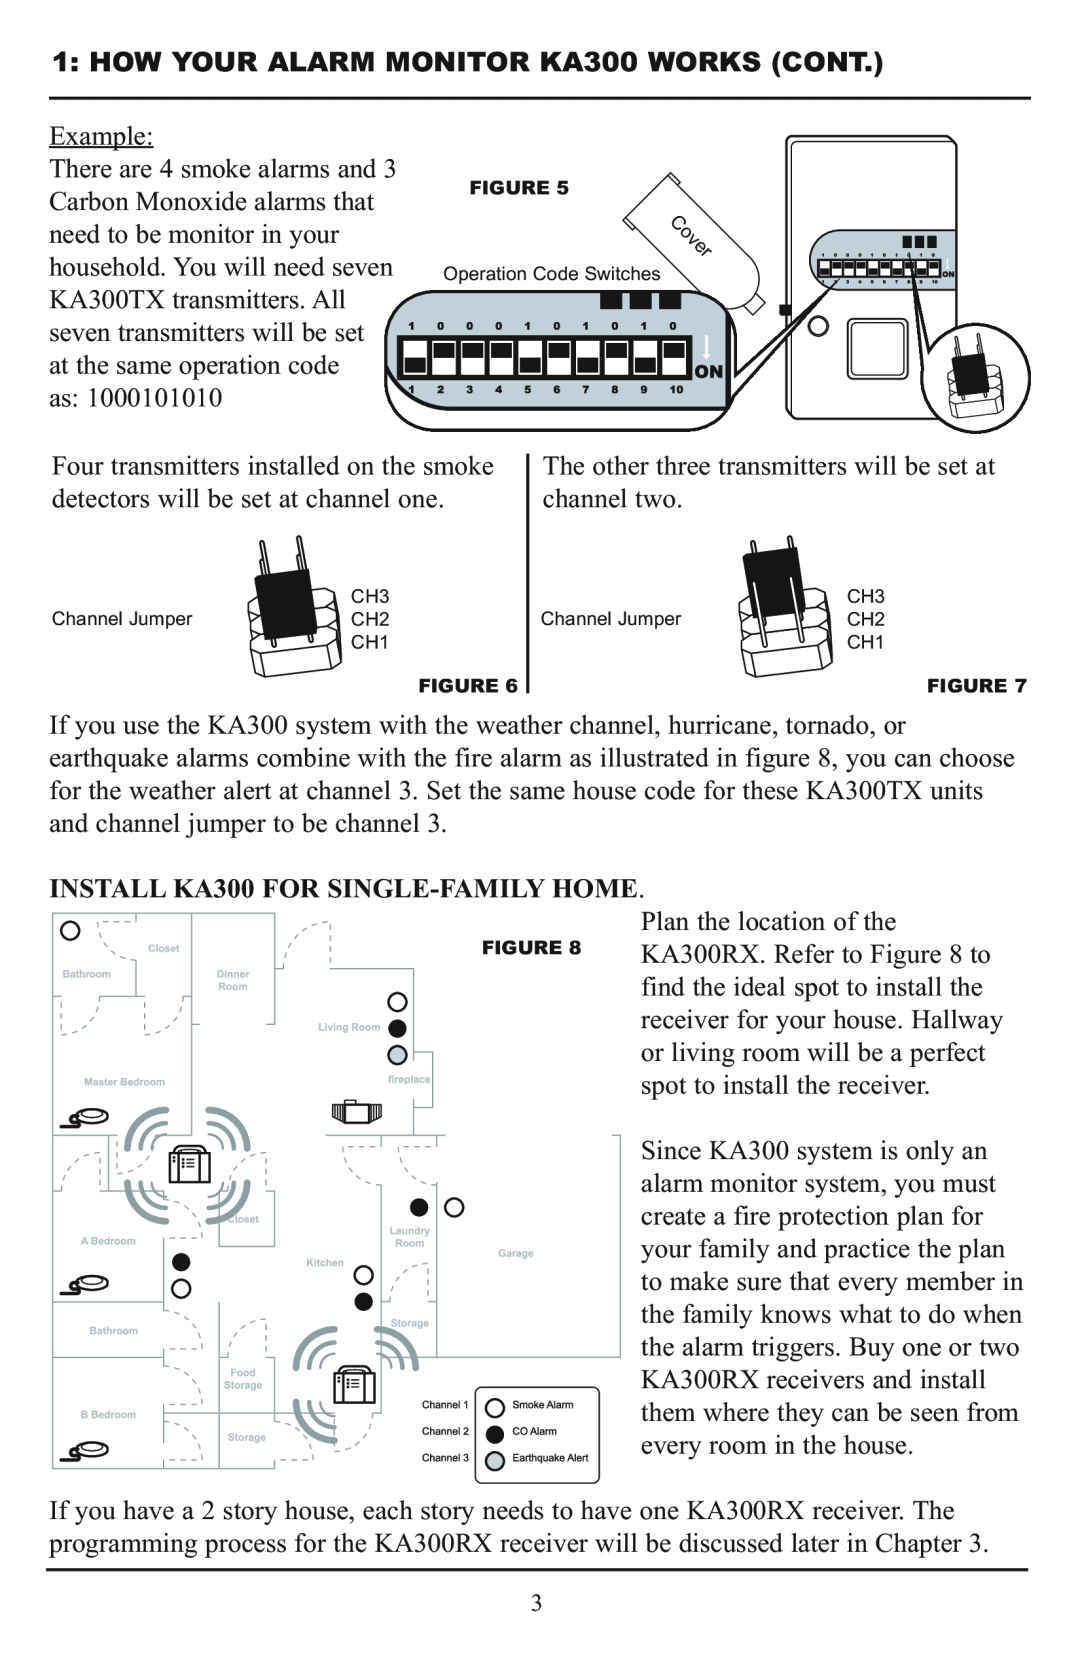 Krown Manufacturing KBS300RX 1: HOW YOUR ALARM MONITOR KA300 WORKS CONT, INSTALL KA300 FOR SINGLE-FAMILYHOME 